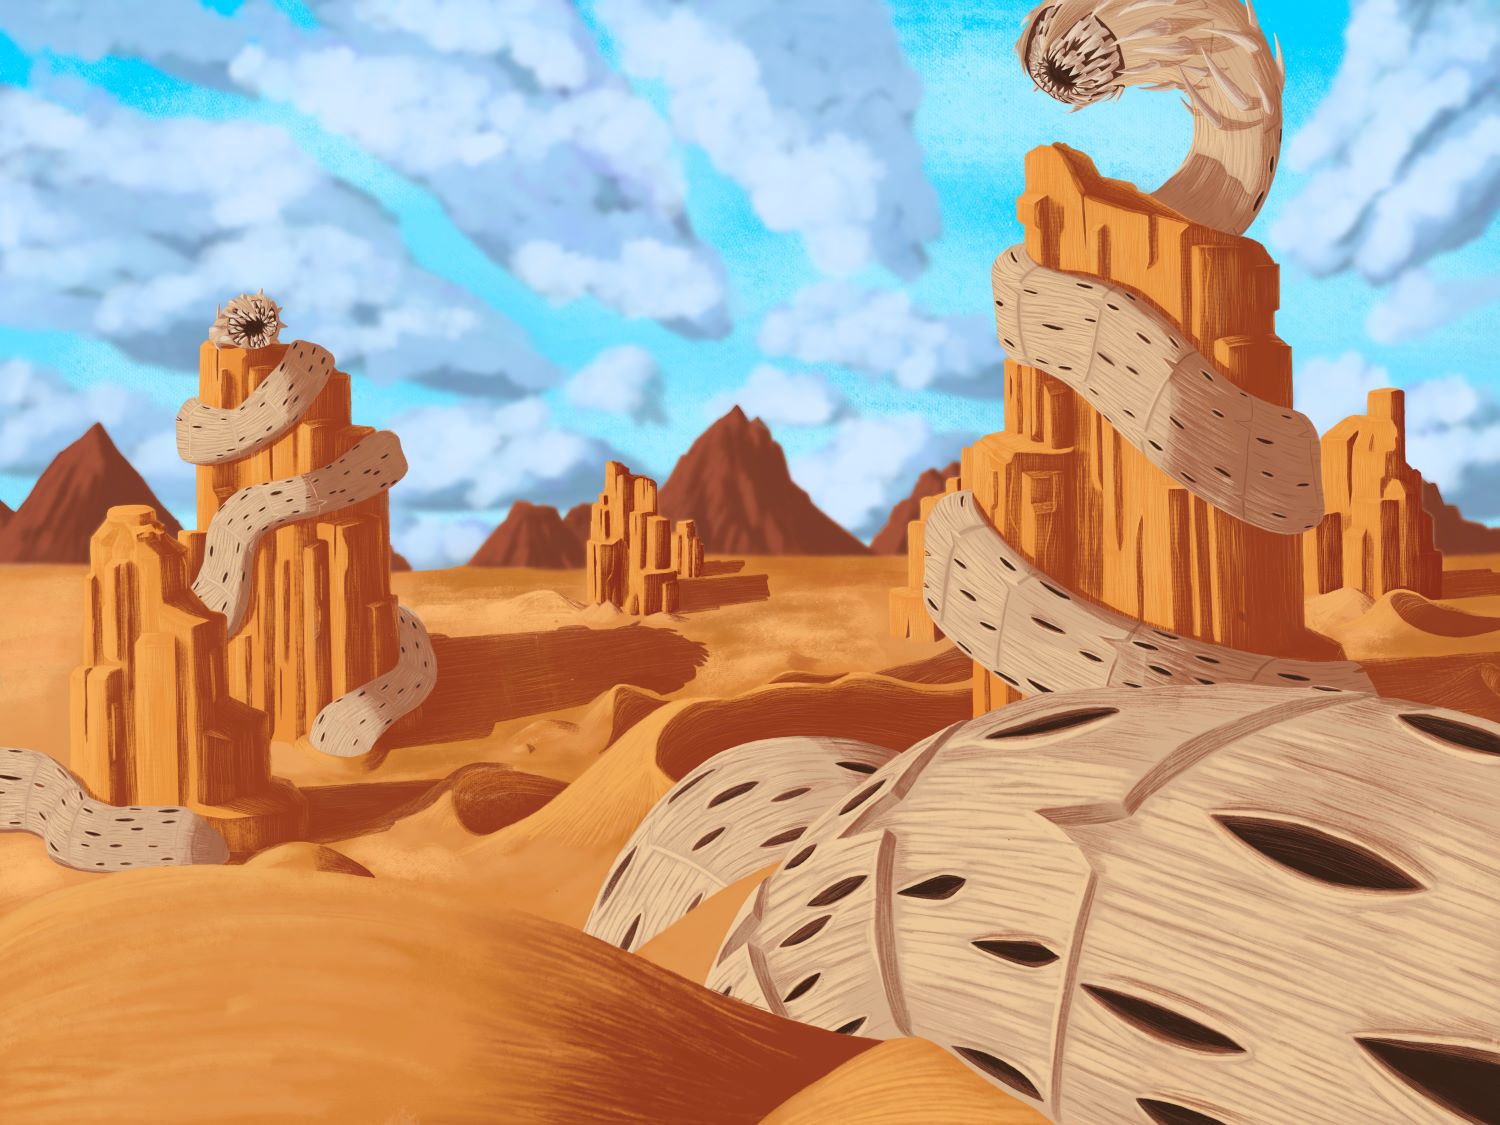 Two giant worms in a desert landscape with mountains and clouds in background